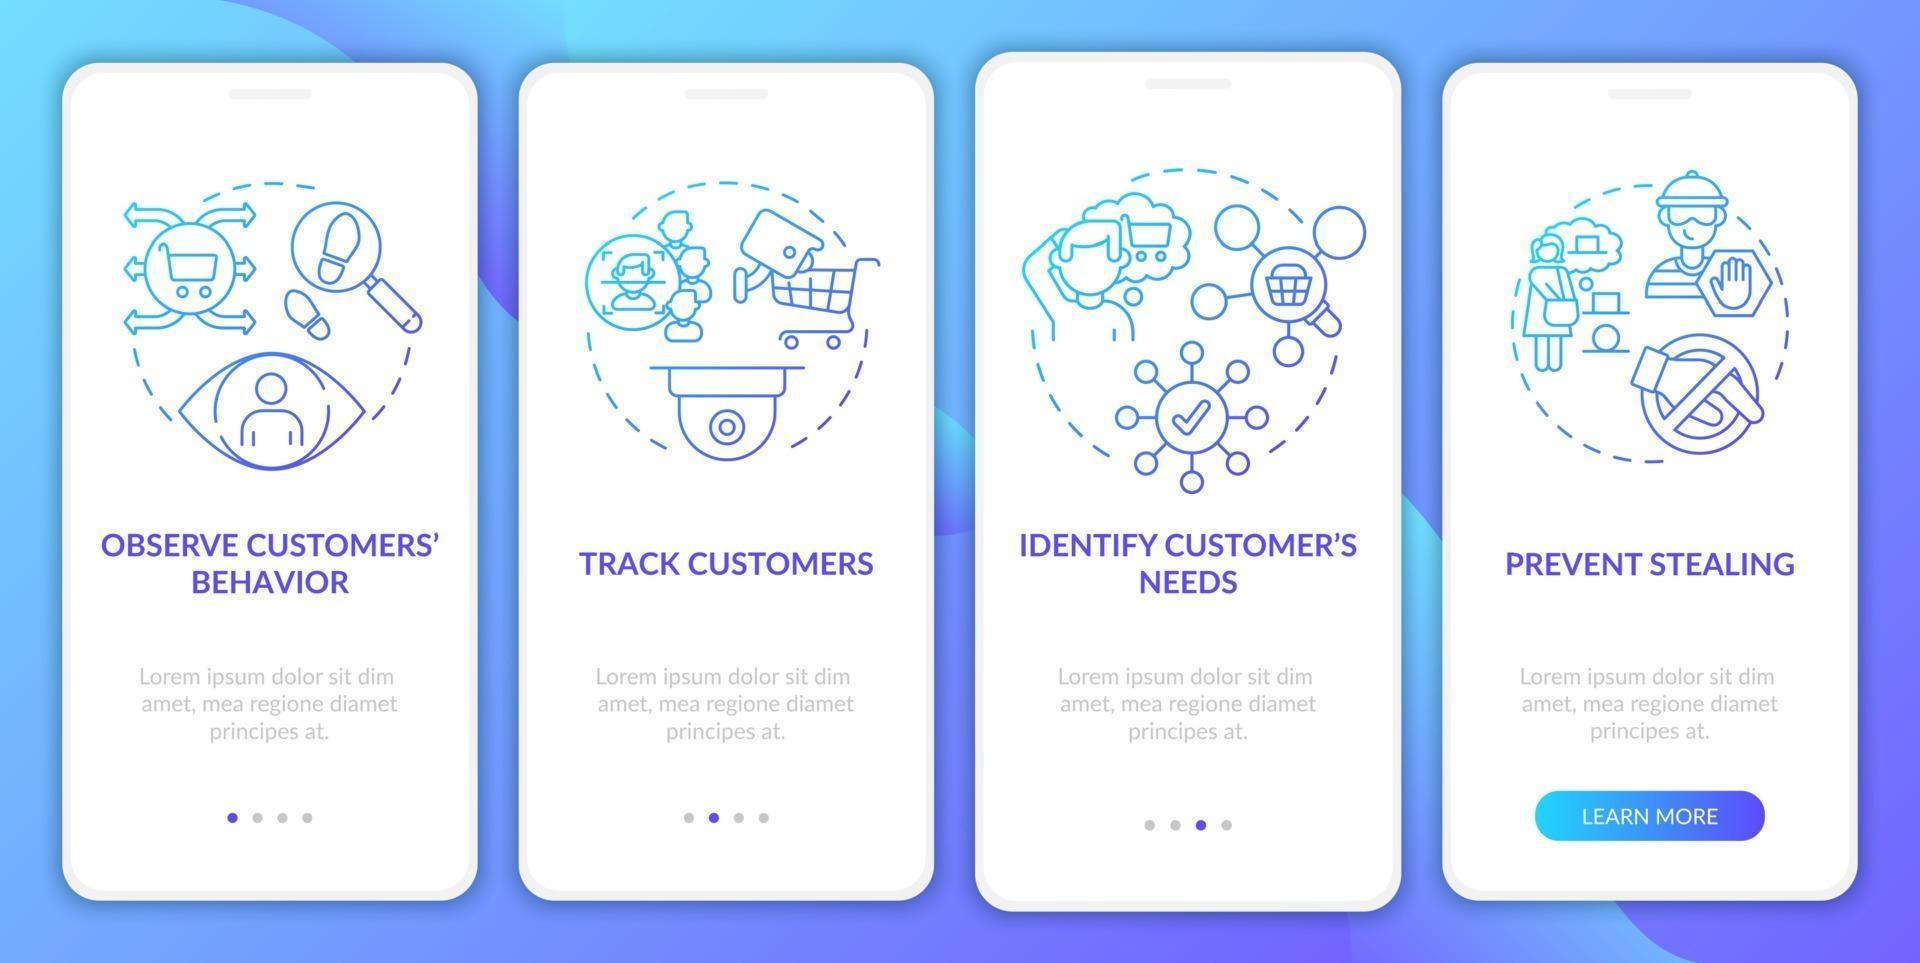 Identify customers needs onboarding mobile app page screen vector